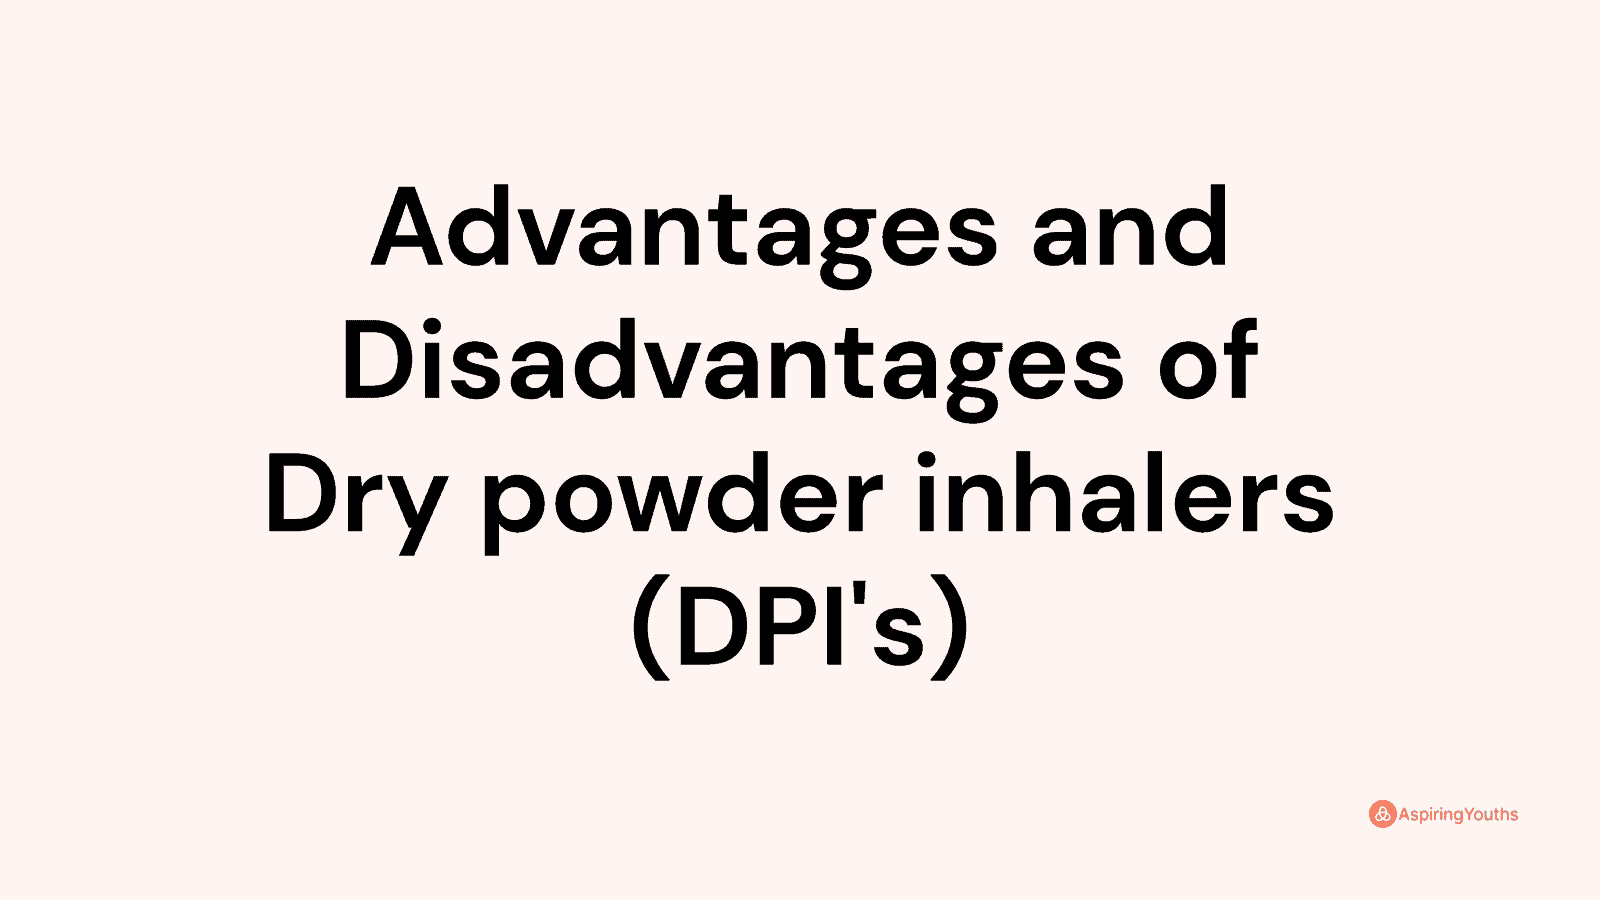 Advantages and disadvantages of Dry powder inhalers (DPI's)